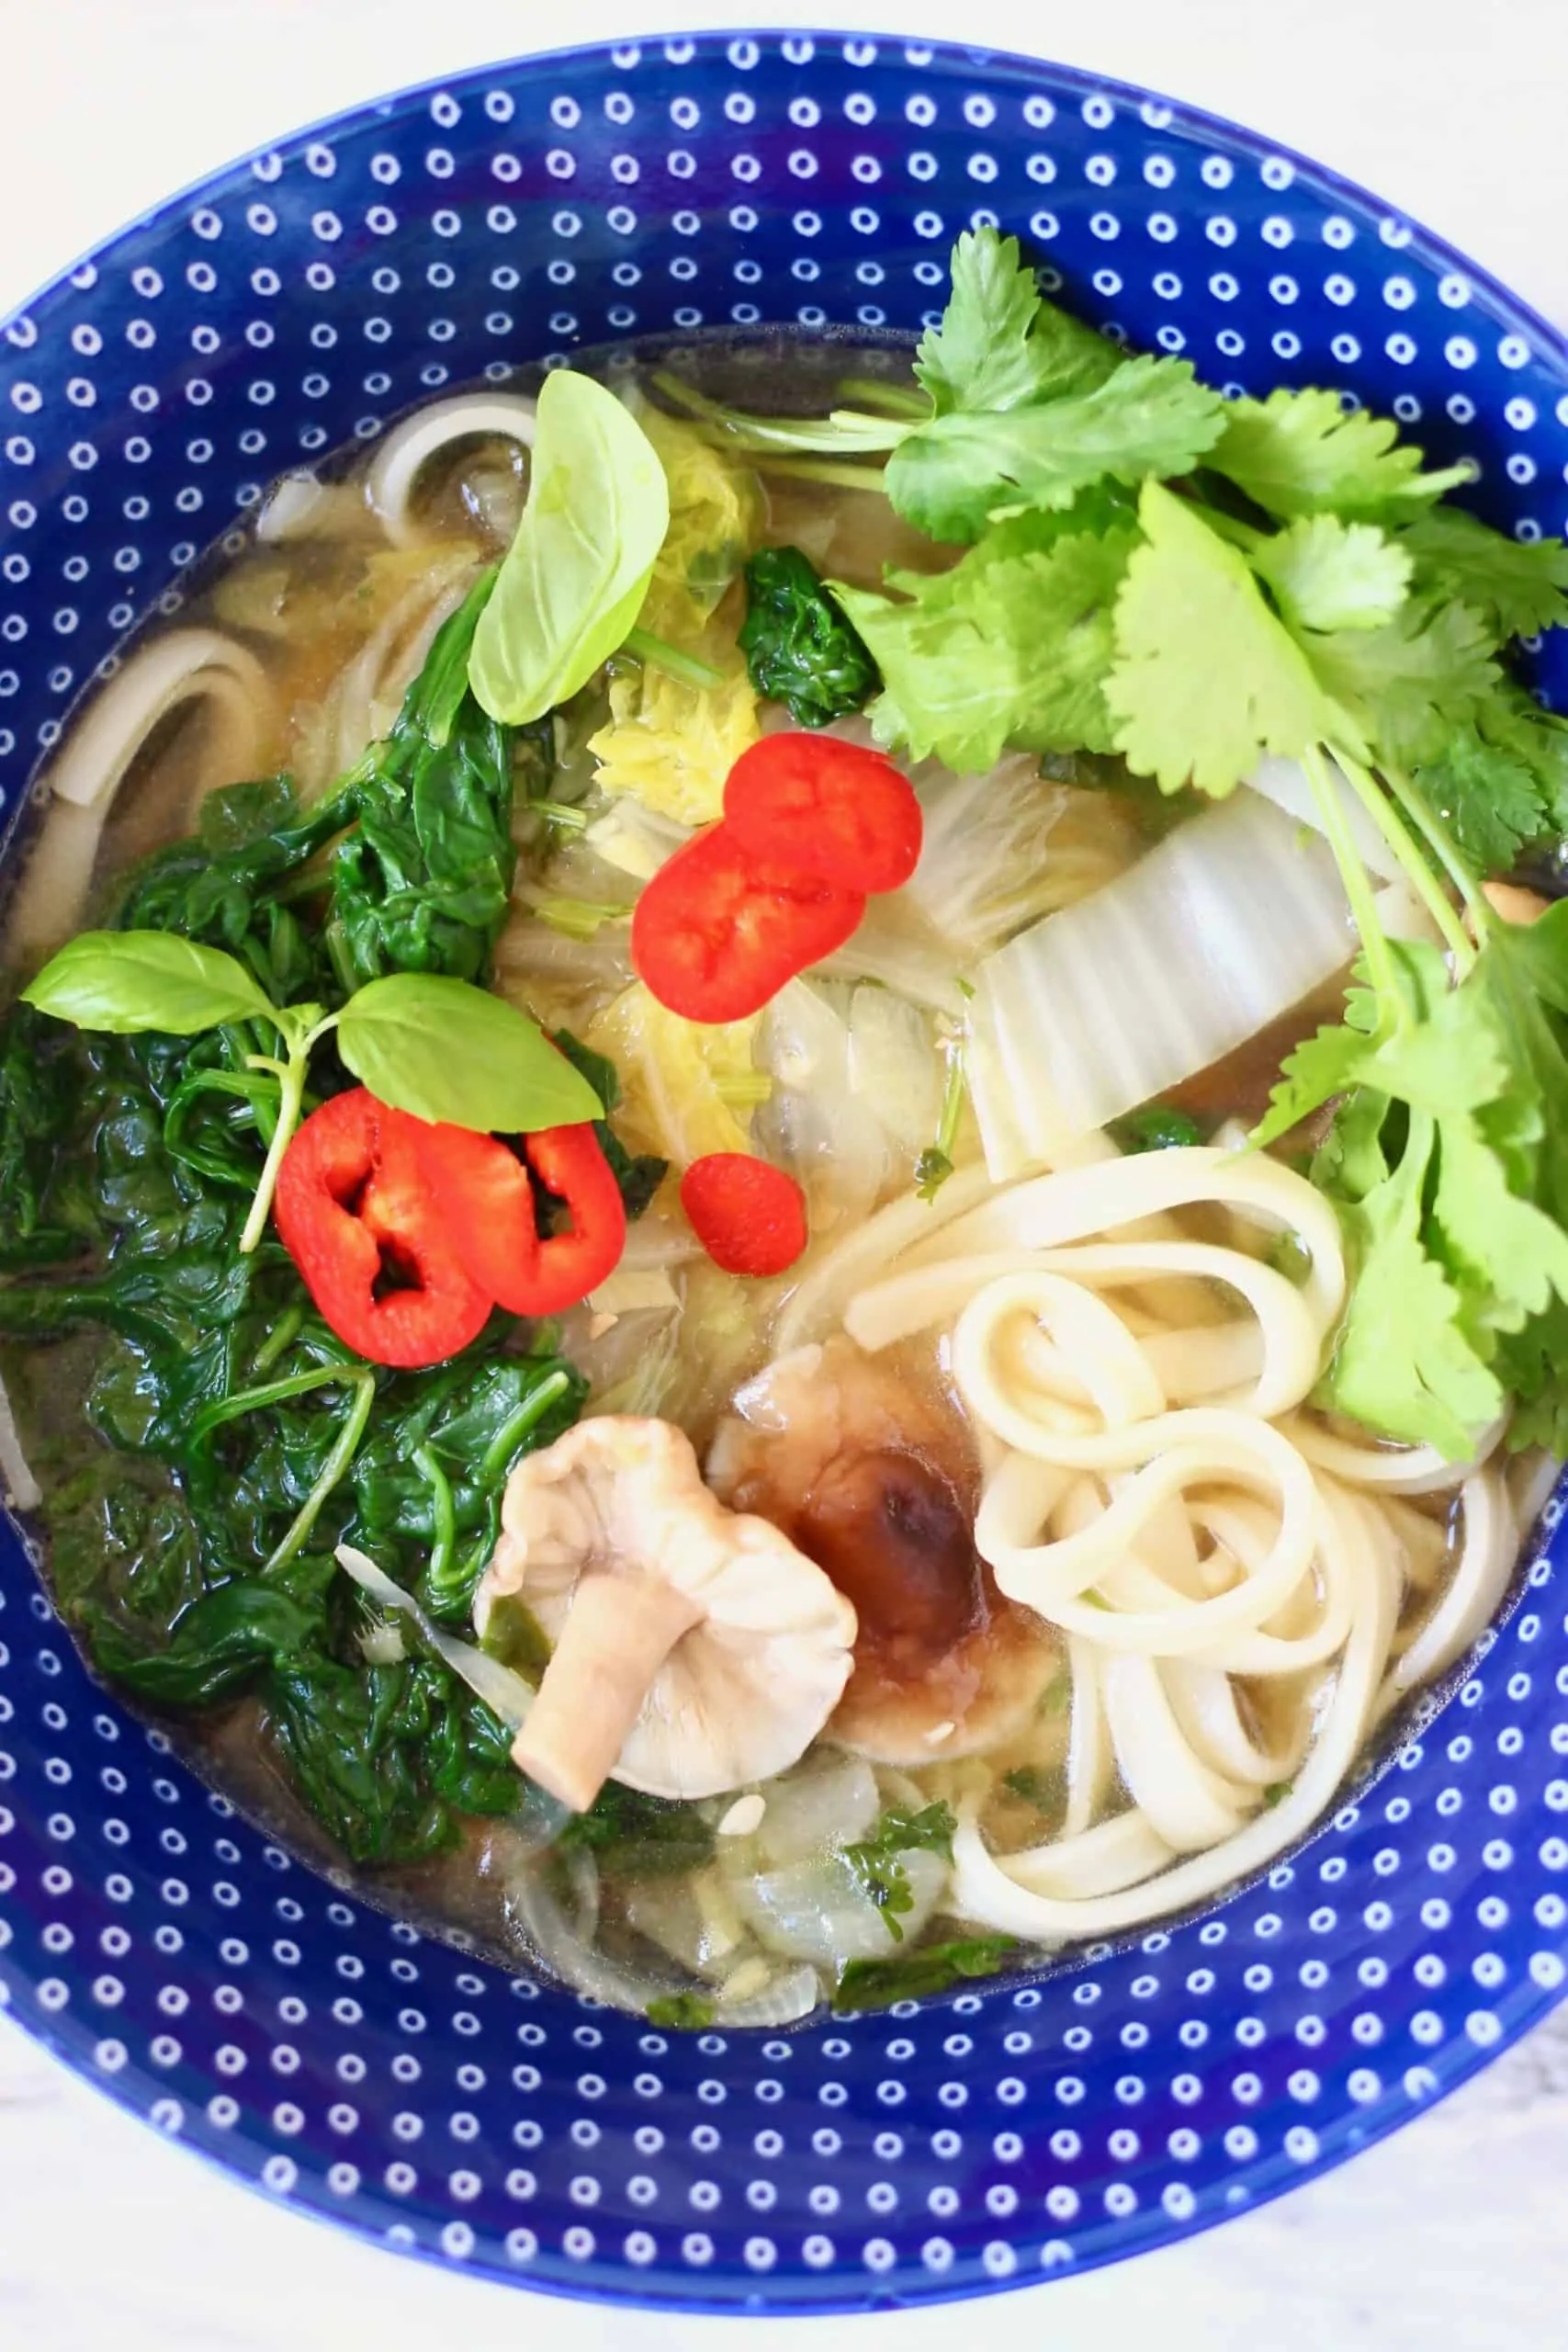 Vegan pho with vegetables in a blue bowl